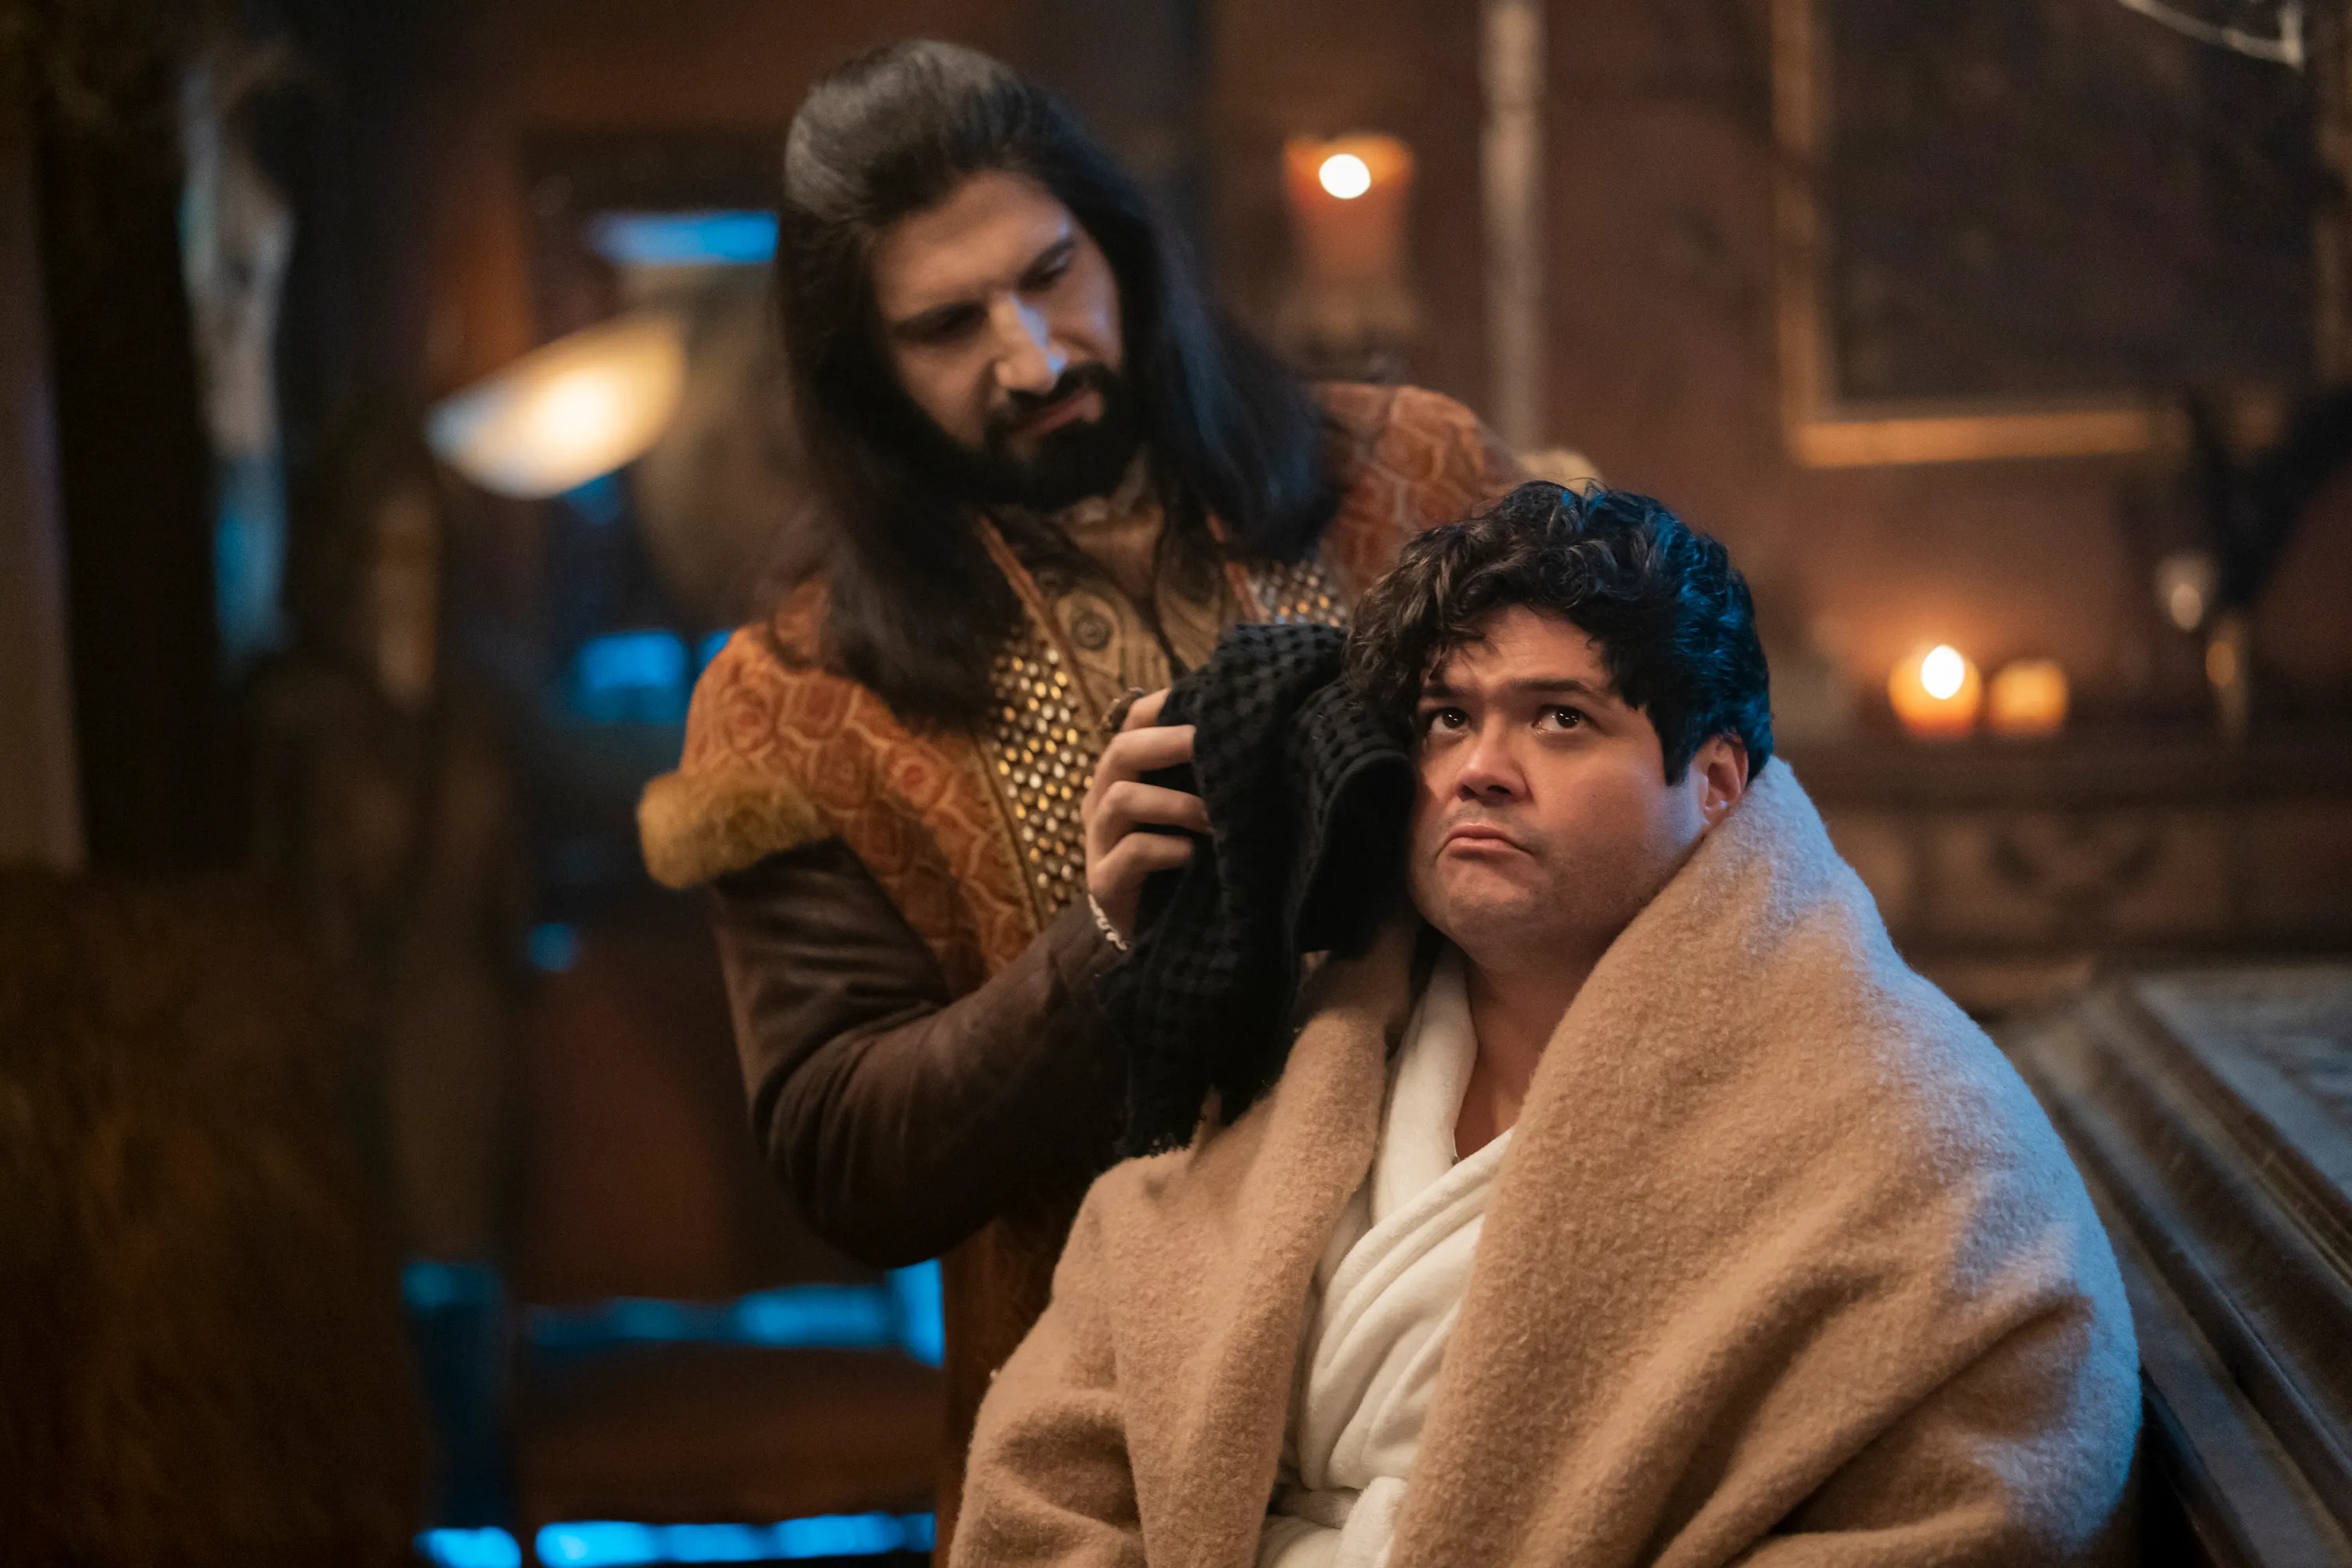 Kayvan Novak as Nandor and Harvey Guillén as Guillermo in "What We Do in the Shadows"